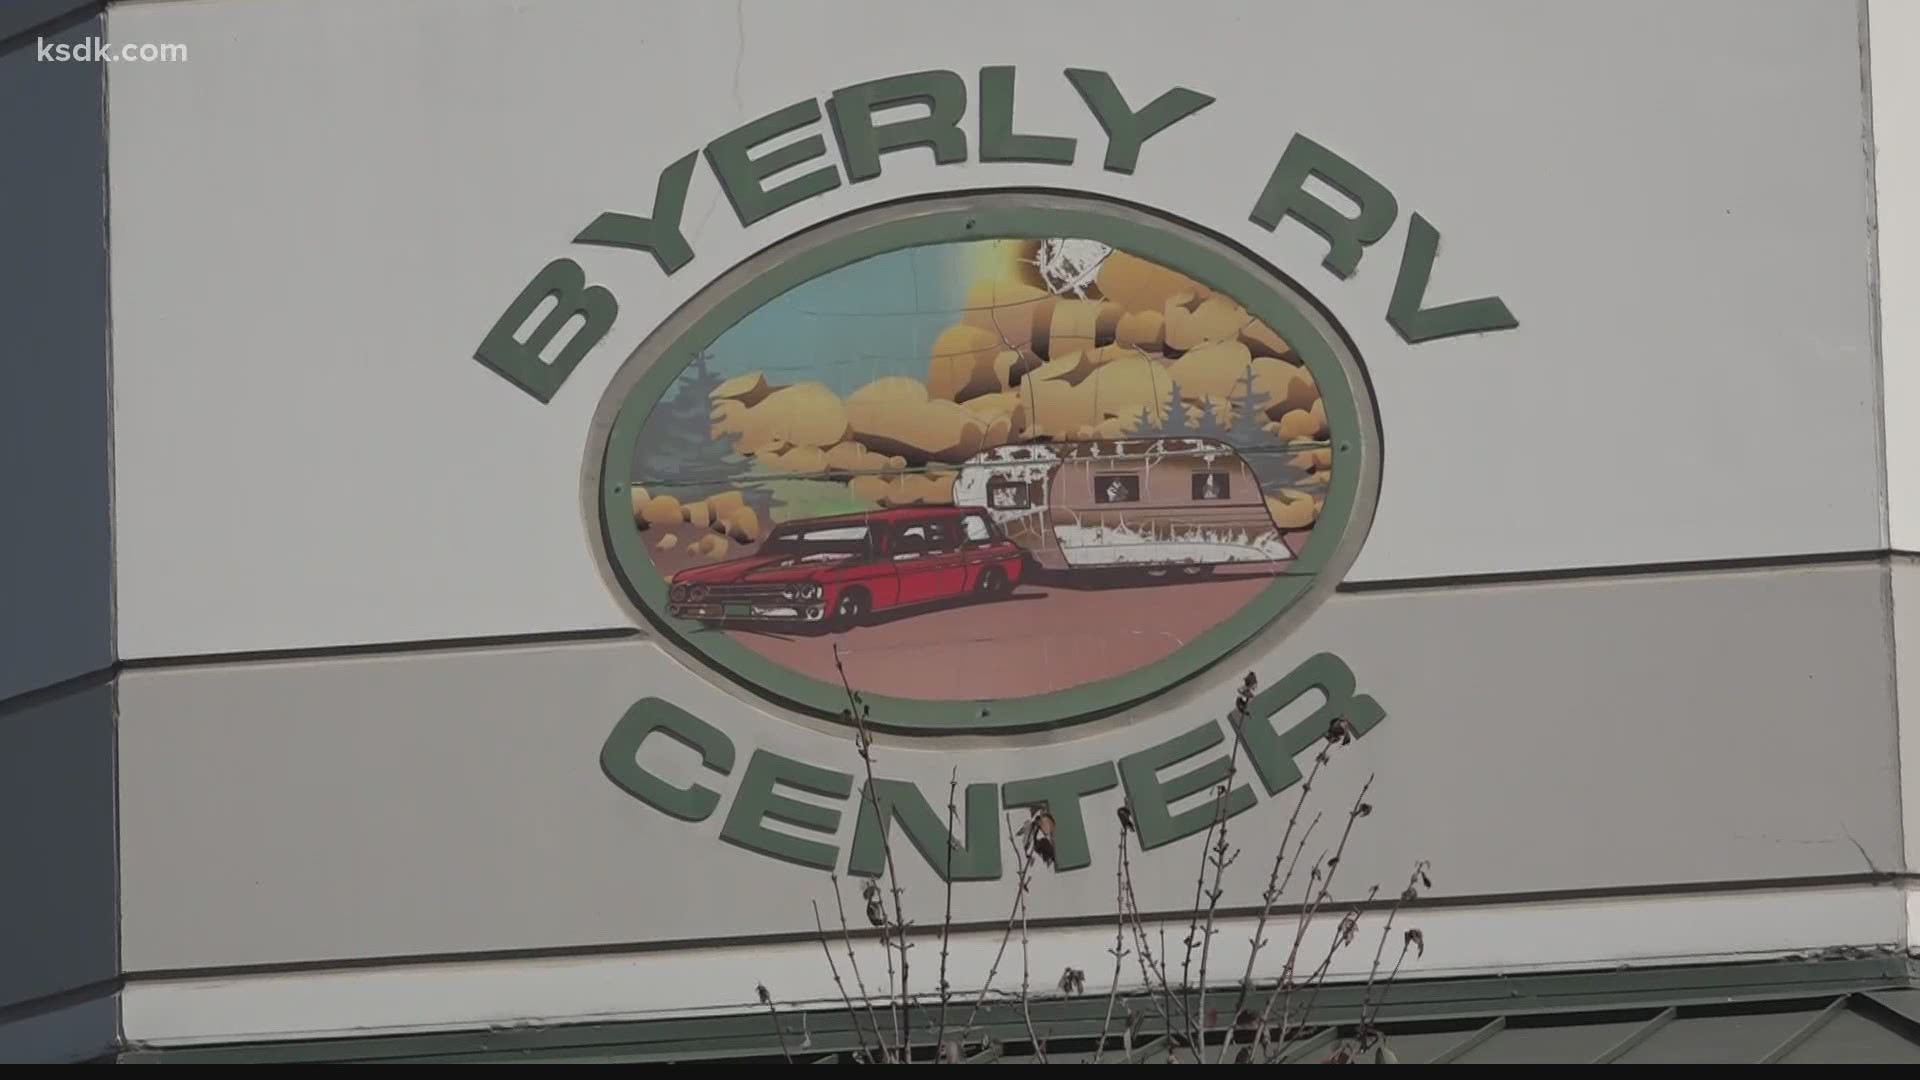 You can find new, used, parts, rentals, service, and more at Byerly RV.